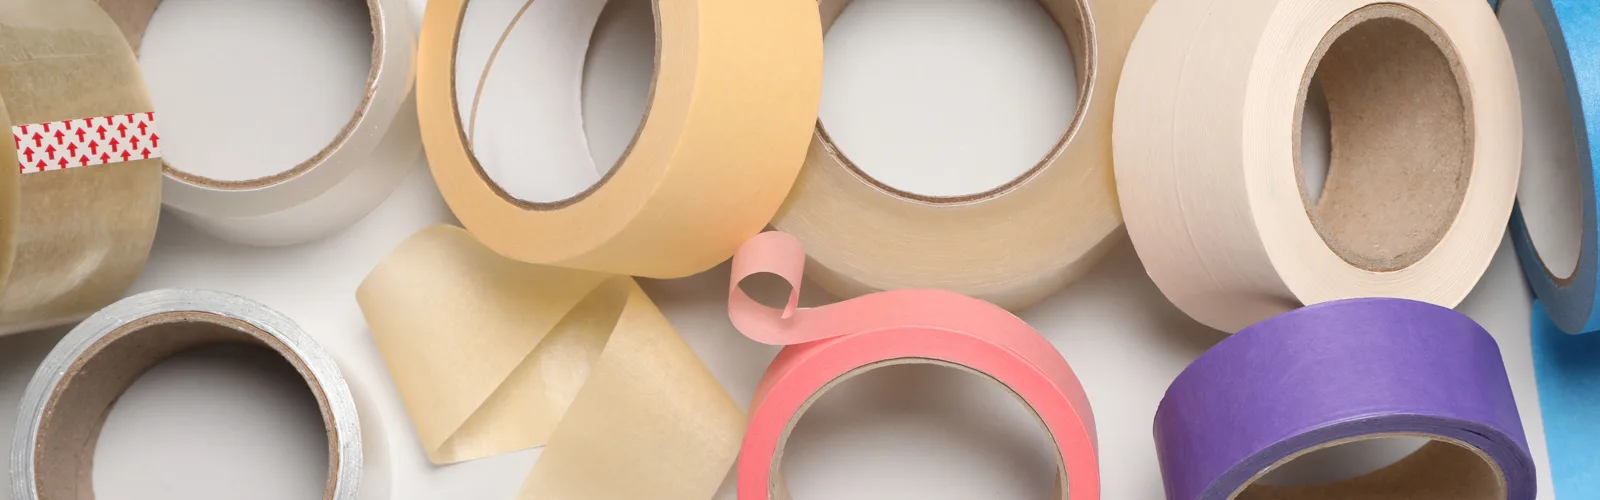 Here's How to Choose the Right Tape for Any Task